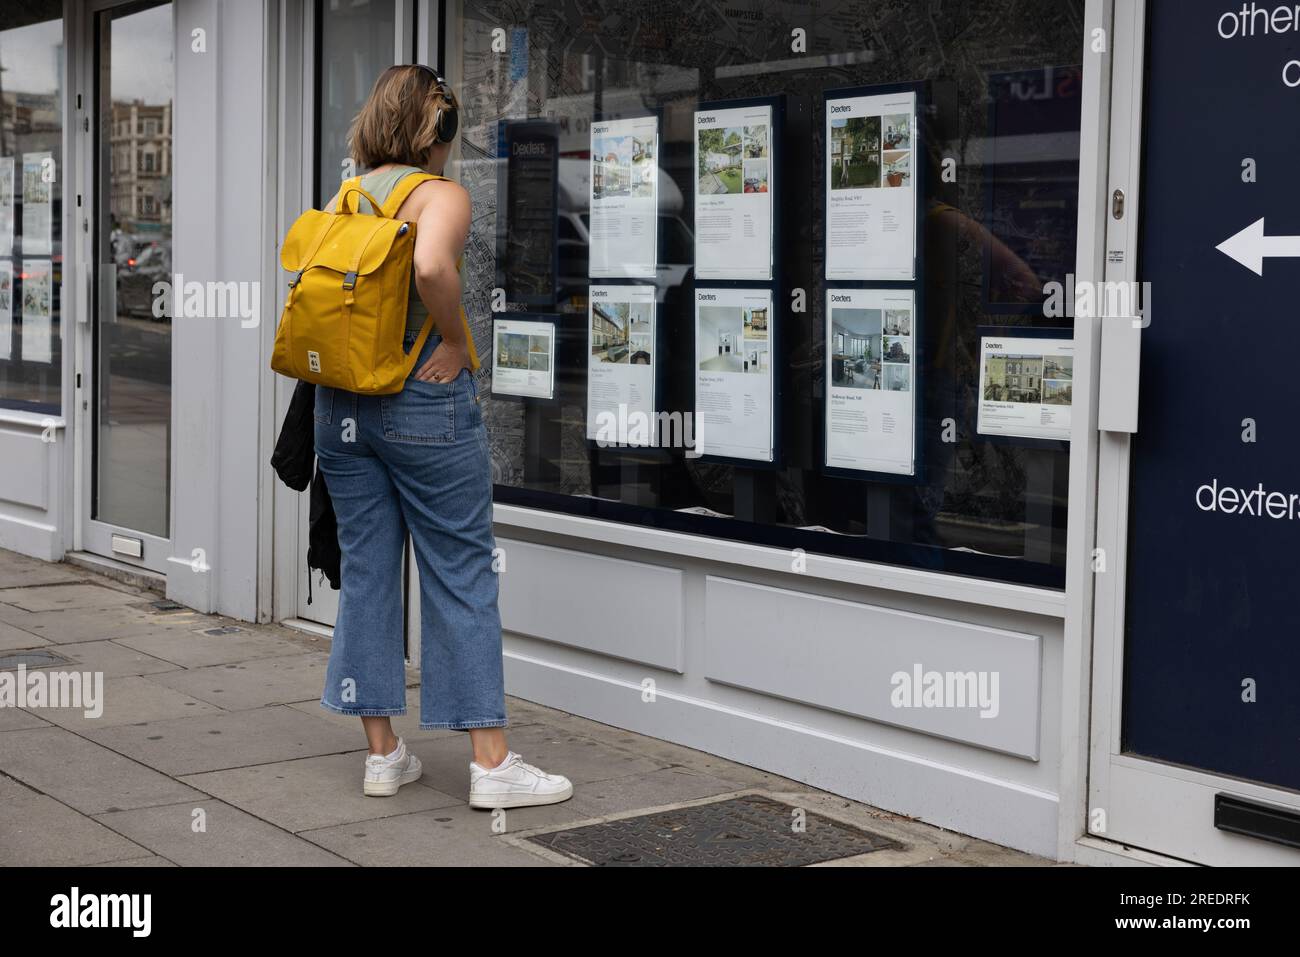 A young woman looks at rental properties in an estate agent window on Kentish Town Road, London, England, UK Stock Photo